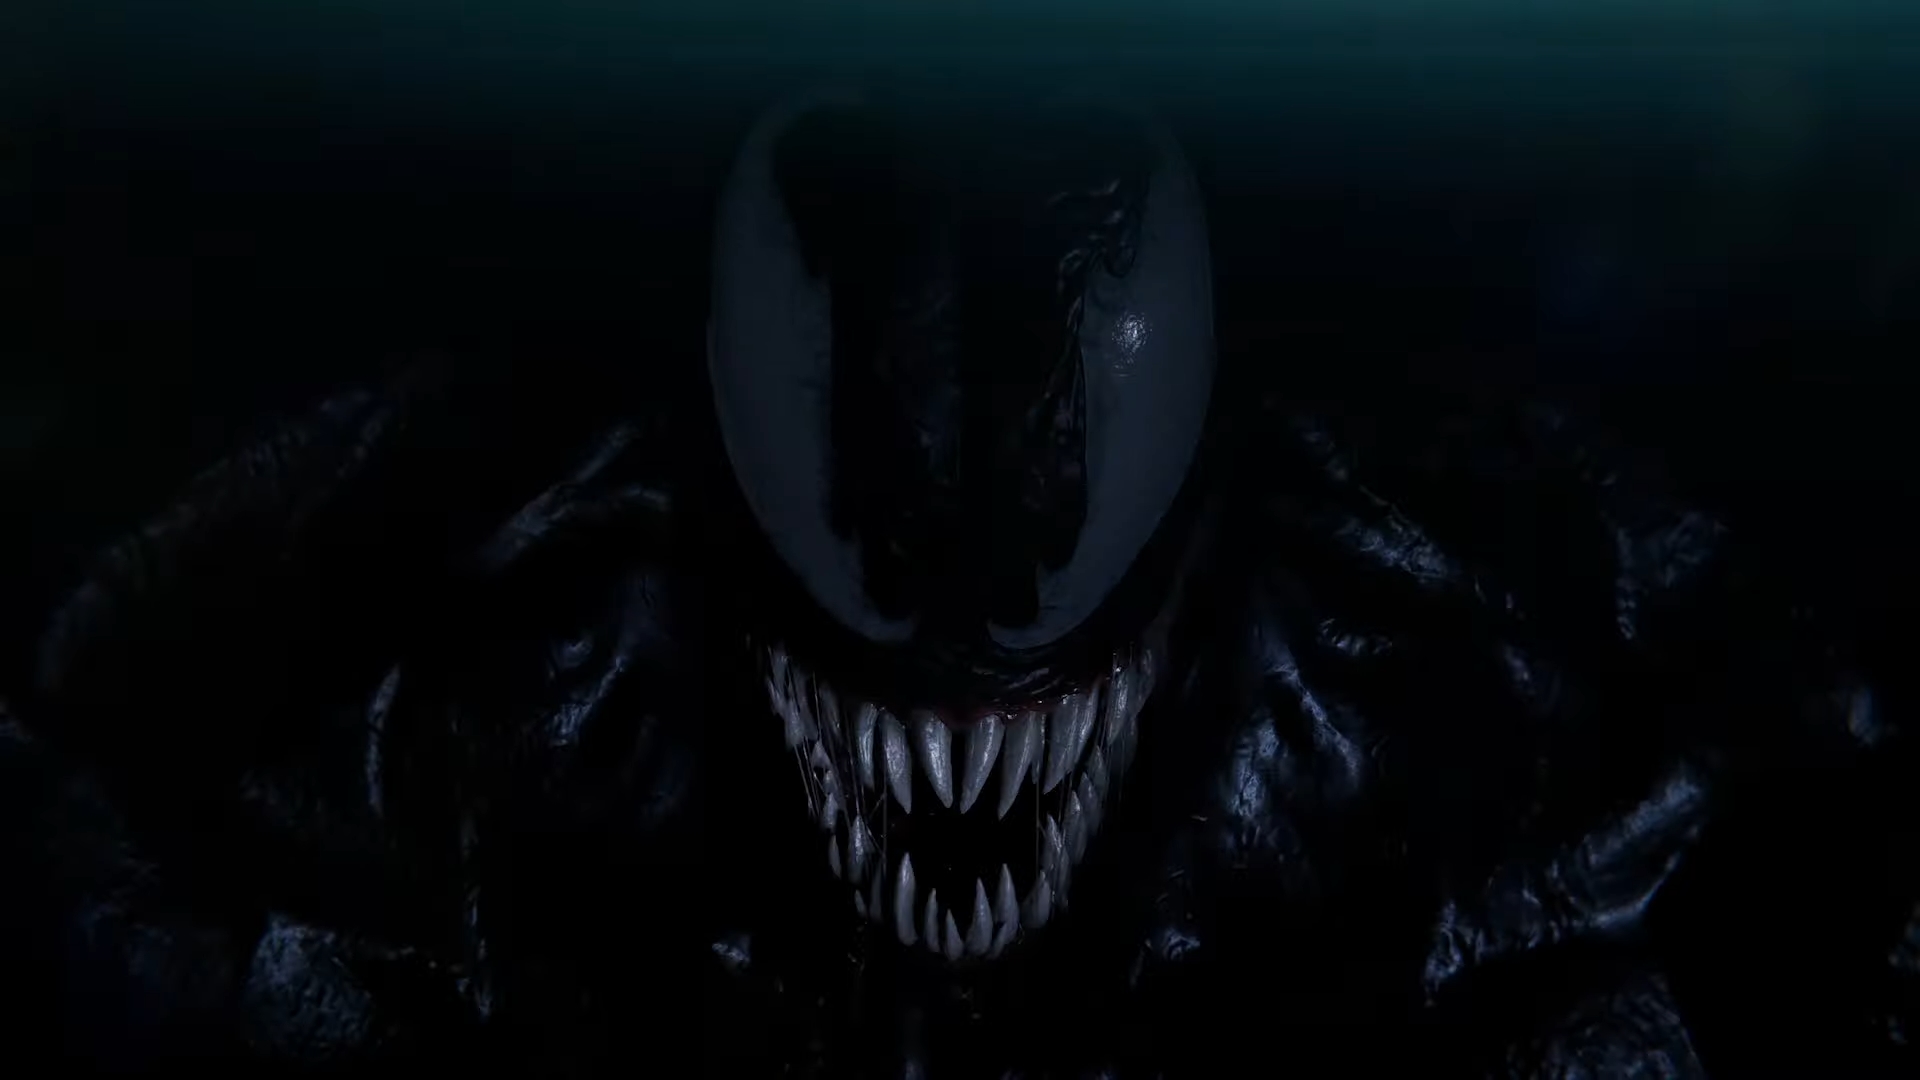 Screenshot of the Marvel's Spider-Man 2 trailer showing a close-up of Venom